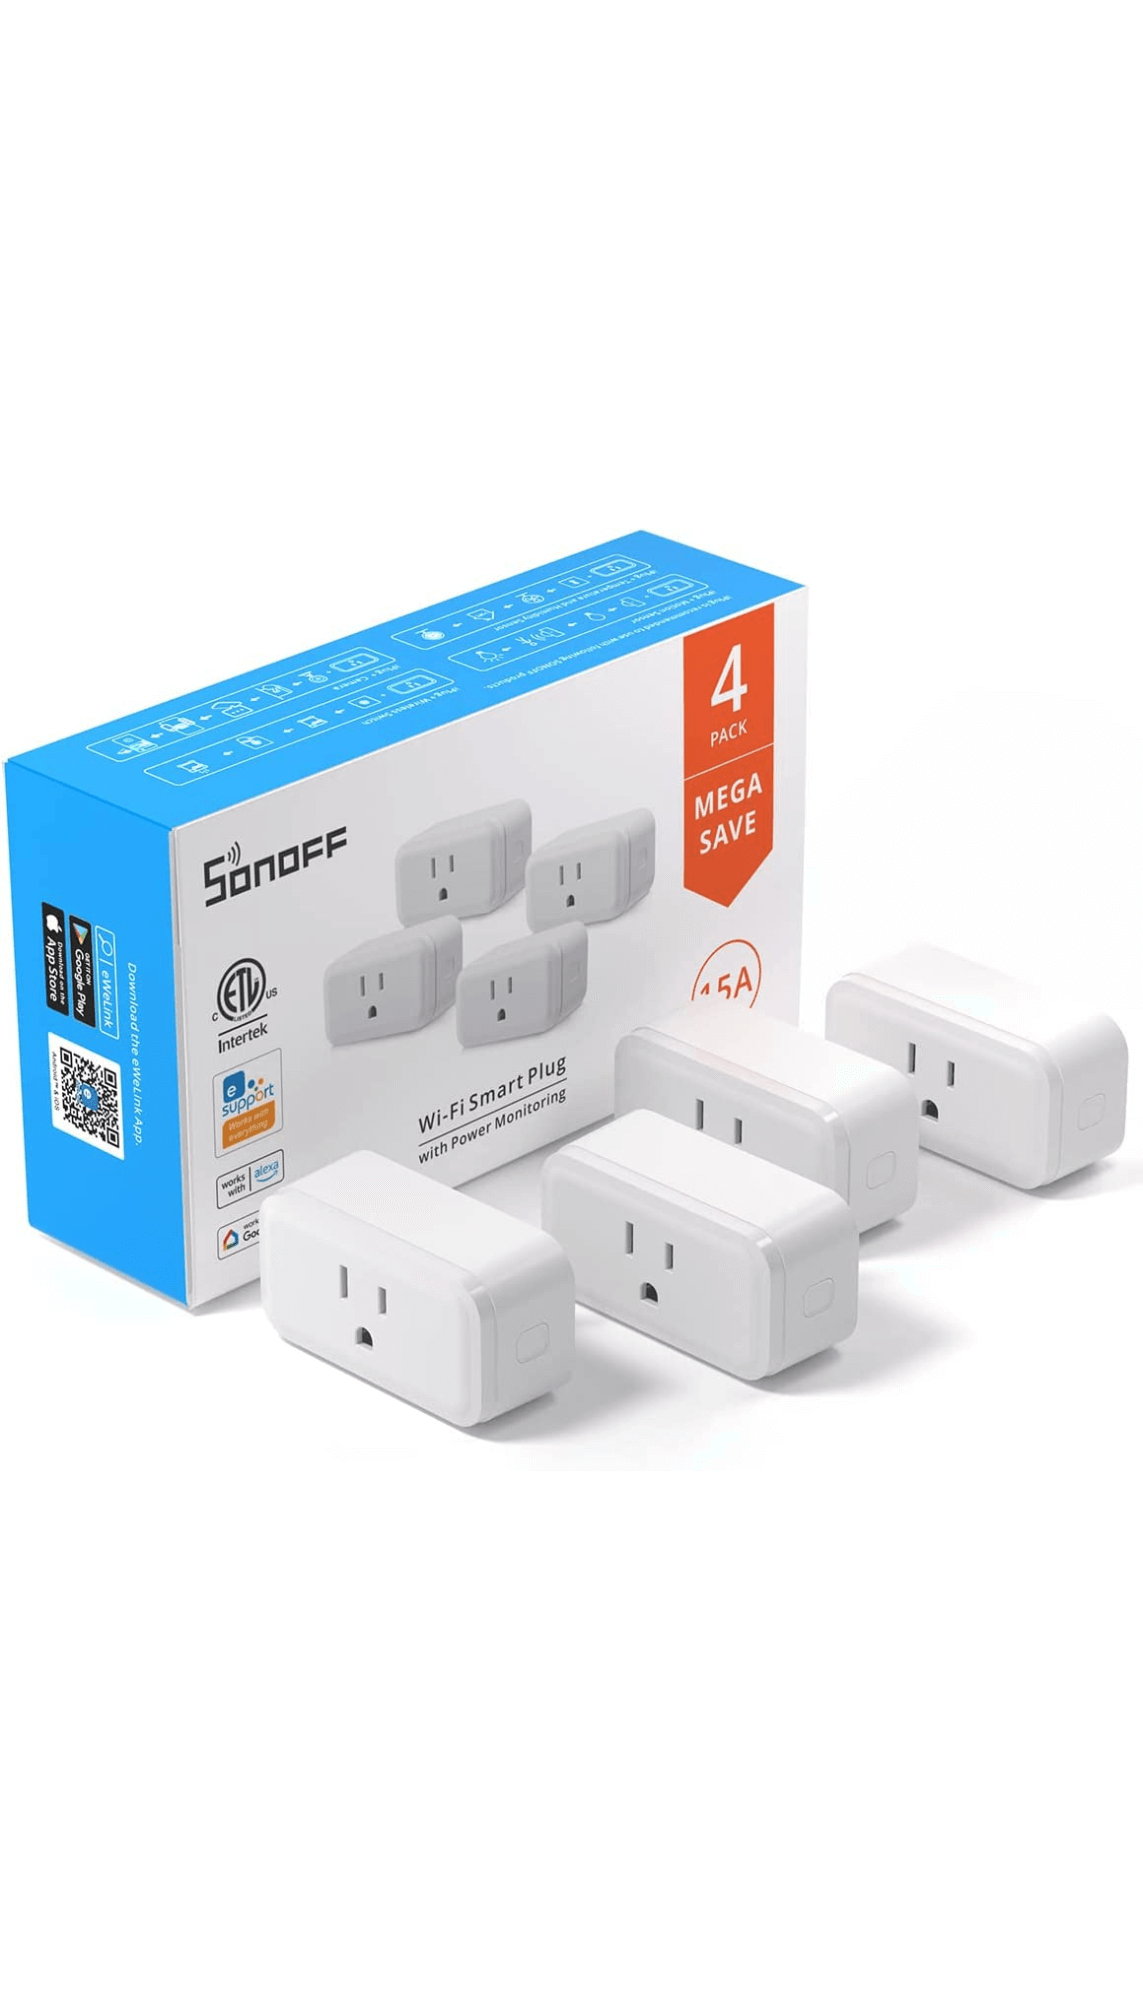 Sonoff s40 wifi smart plug with energy monitoring